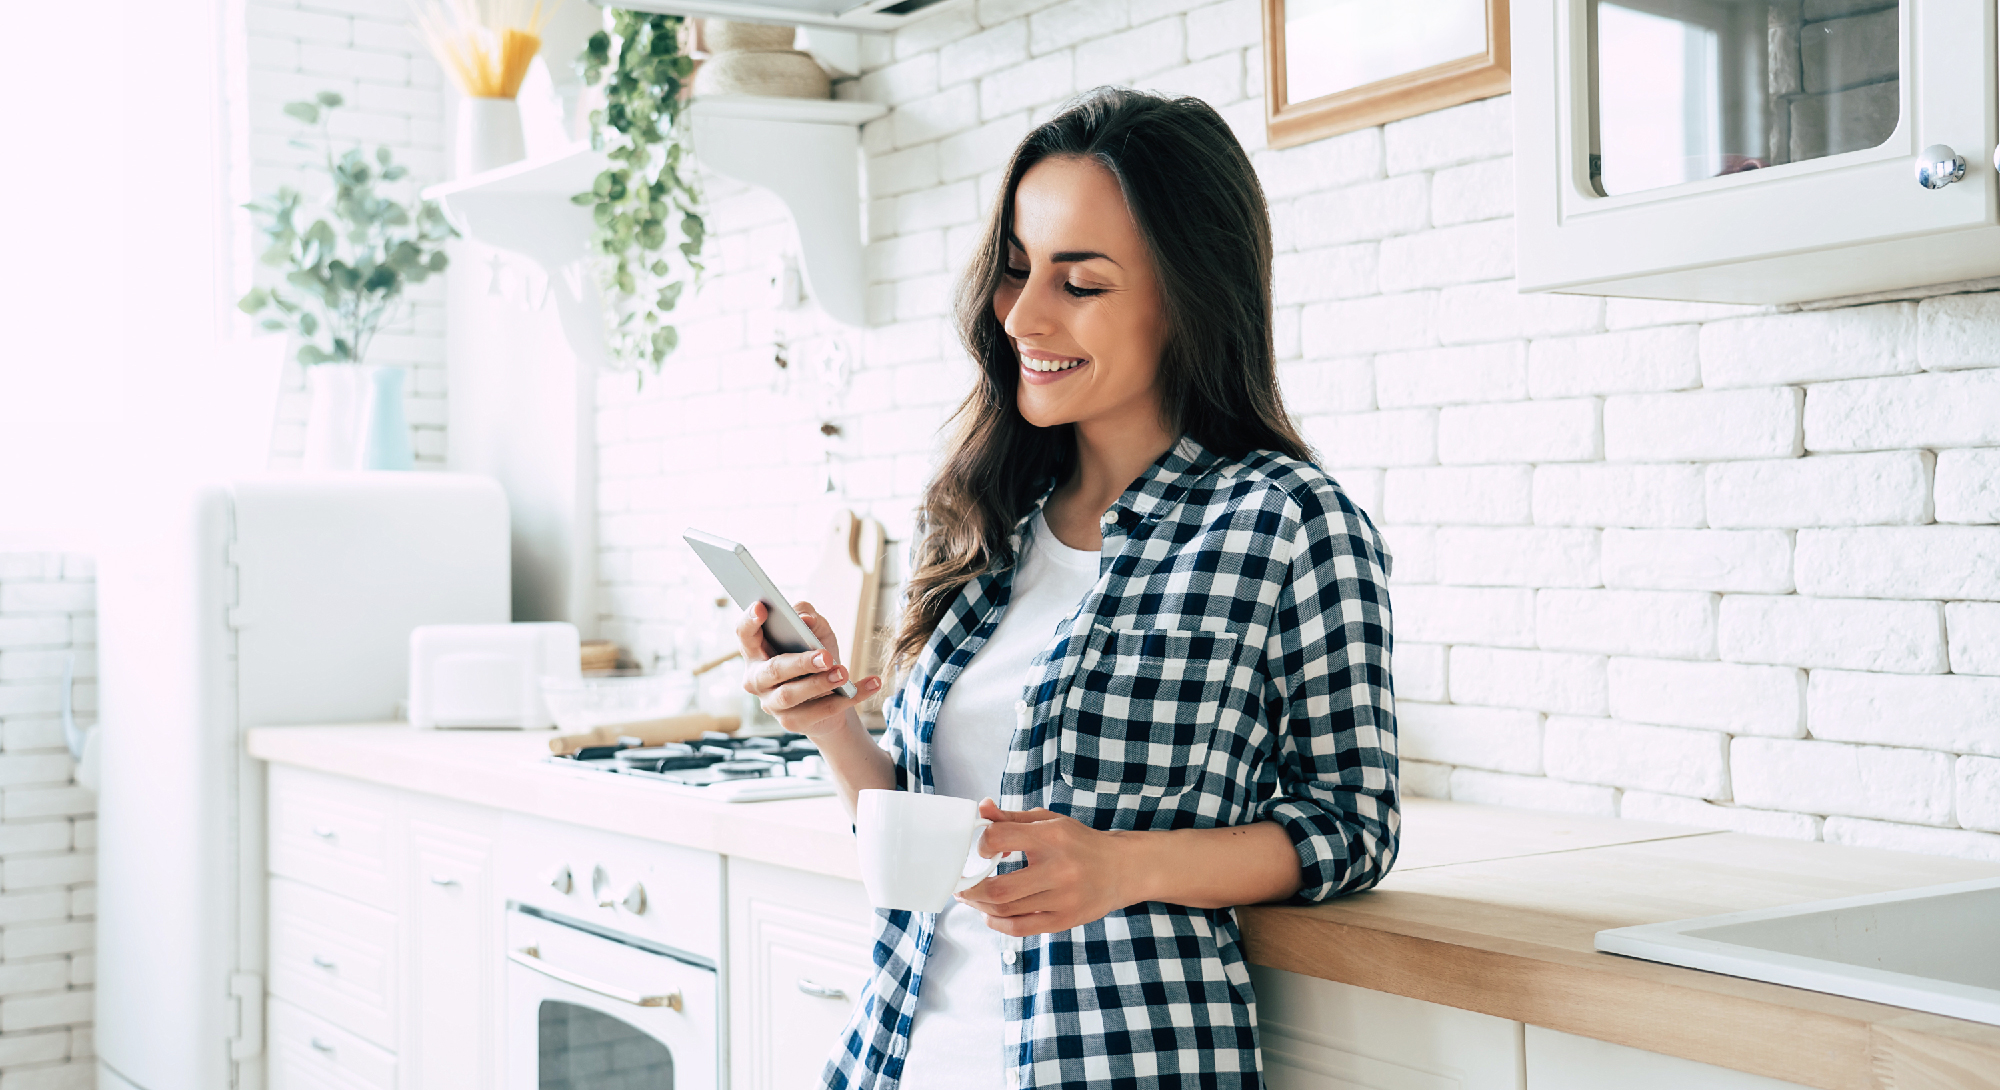 Woman holding coffee cup and looking at her phone in kitchen